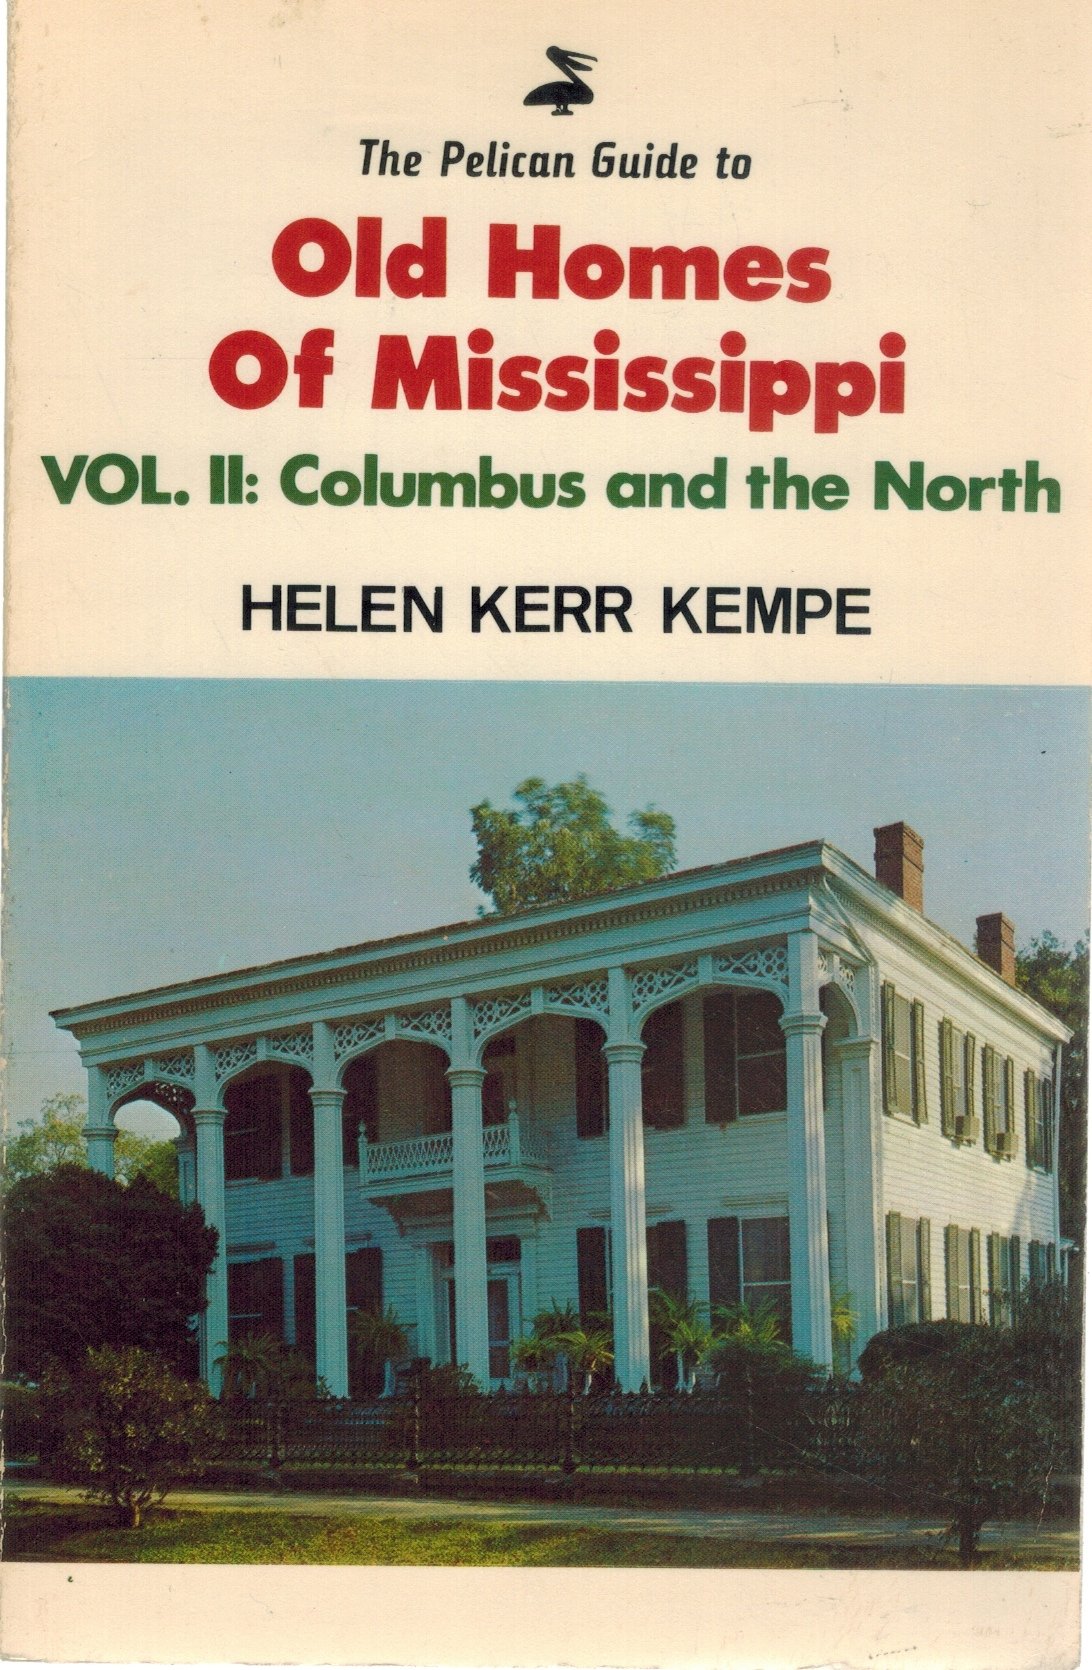 THE PELICAN GUIDE TO OLD HOMES OF MISSISSIPPI  Vol 2 Columbus and the North  by Kempe, Helen Kerr